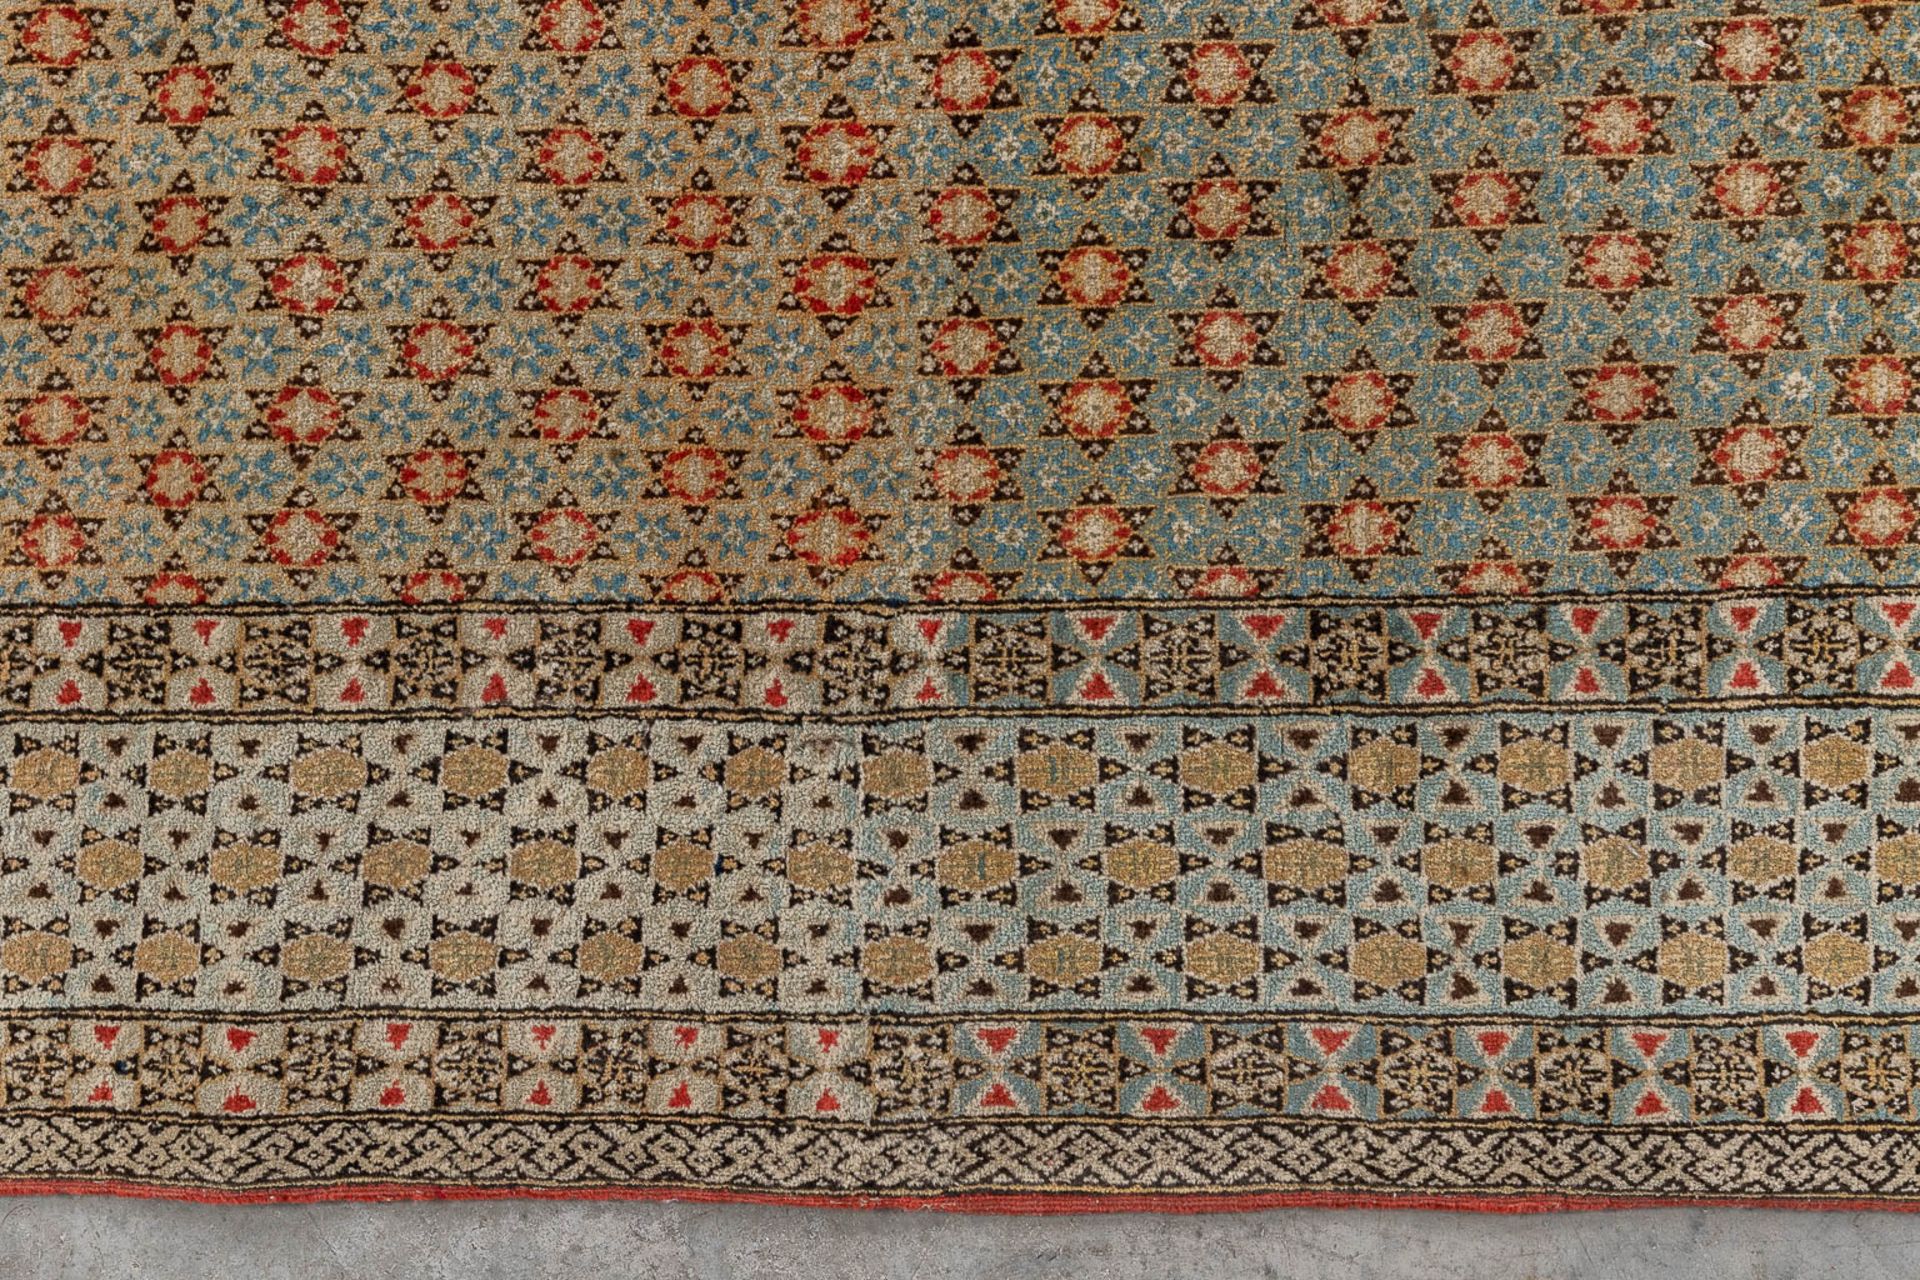 A collection of 2 Oriental hand-made carpets. Persia. (L: 220 x W: 134 cm) - Image 8 of 10